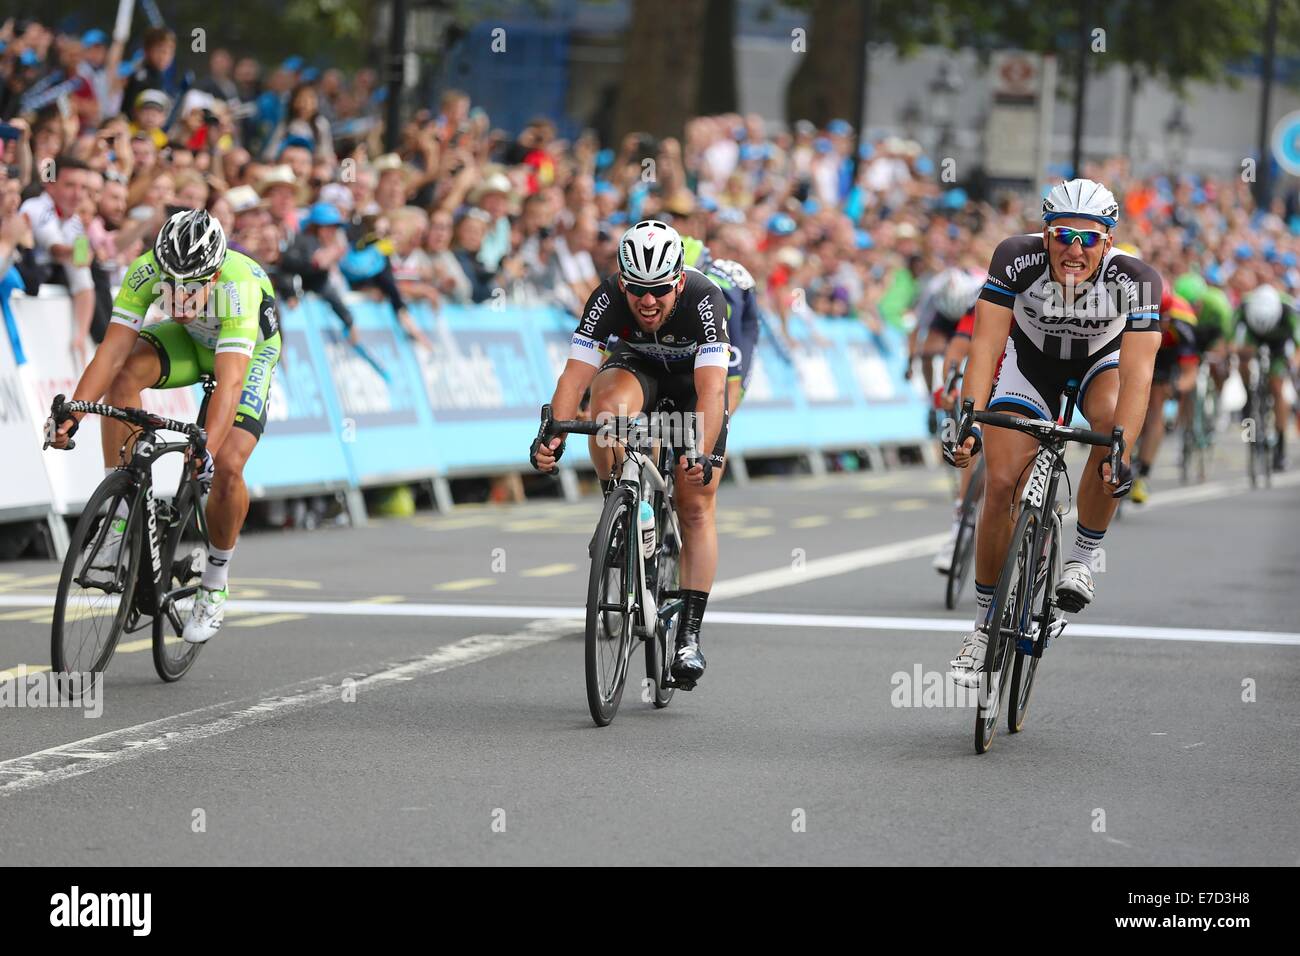 London. 14th September 2014. 2014 Tour of Britain, Stage 8b. London Circuit Race. Marcel Kittel (right) beats Mark Cavendish in the sprint to win the final stage Credit:  Neville Styles/Alamy Live News Stock Photo